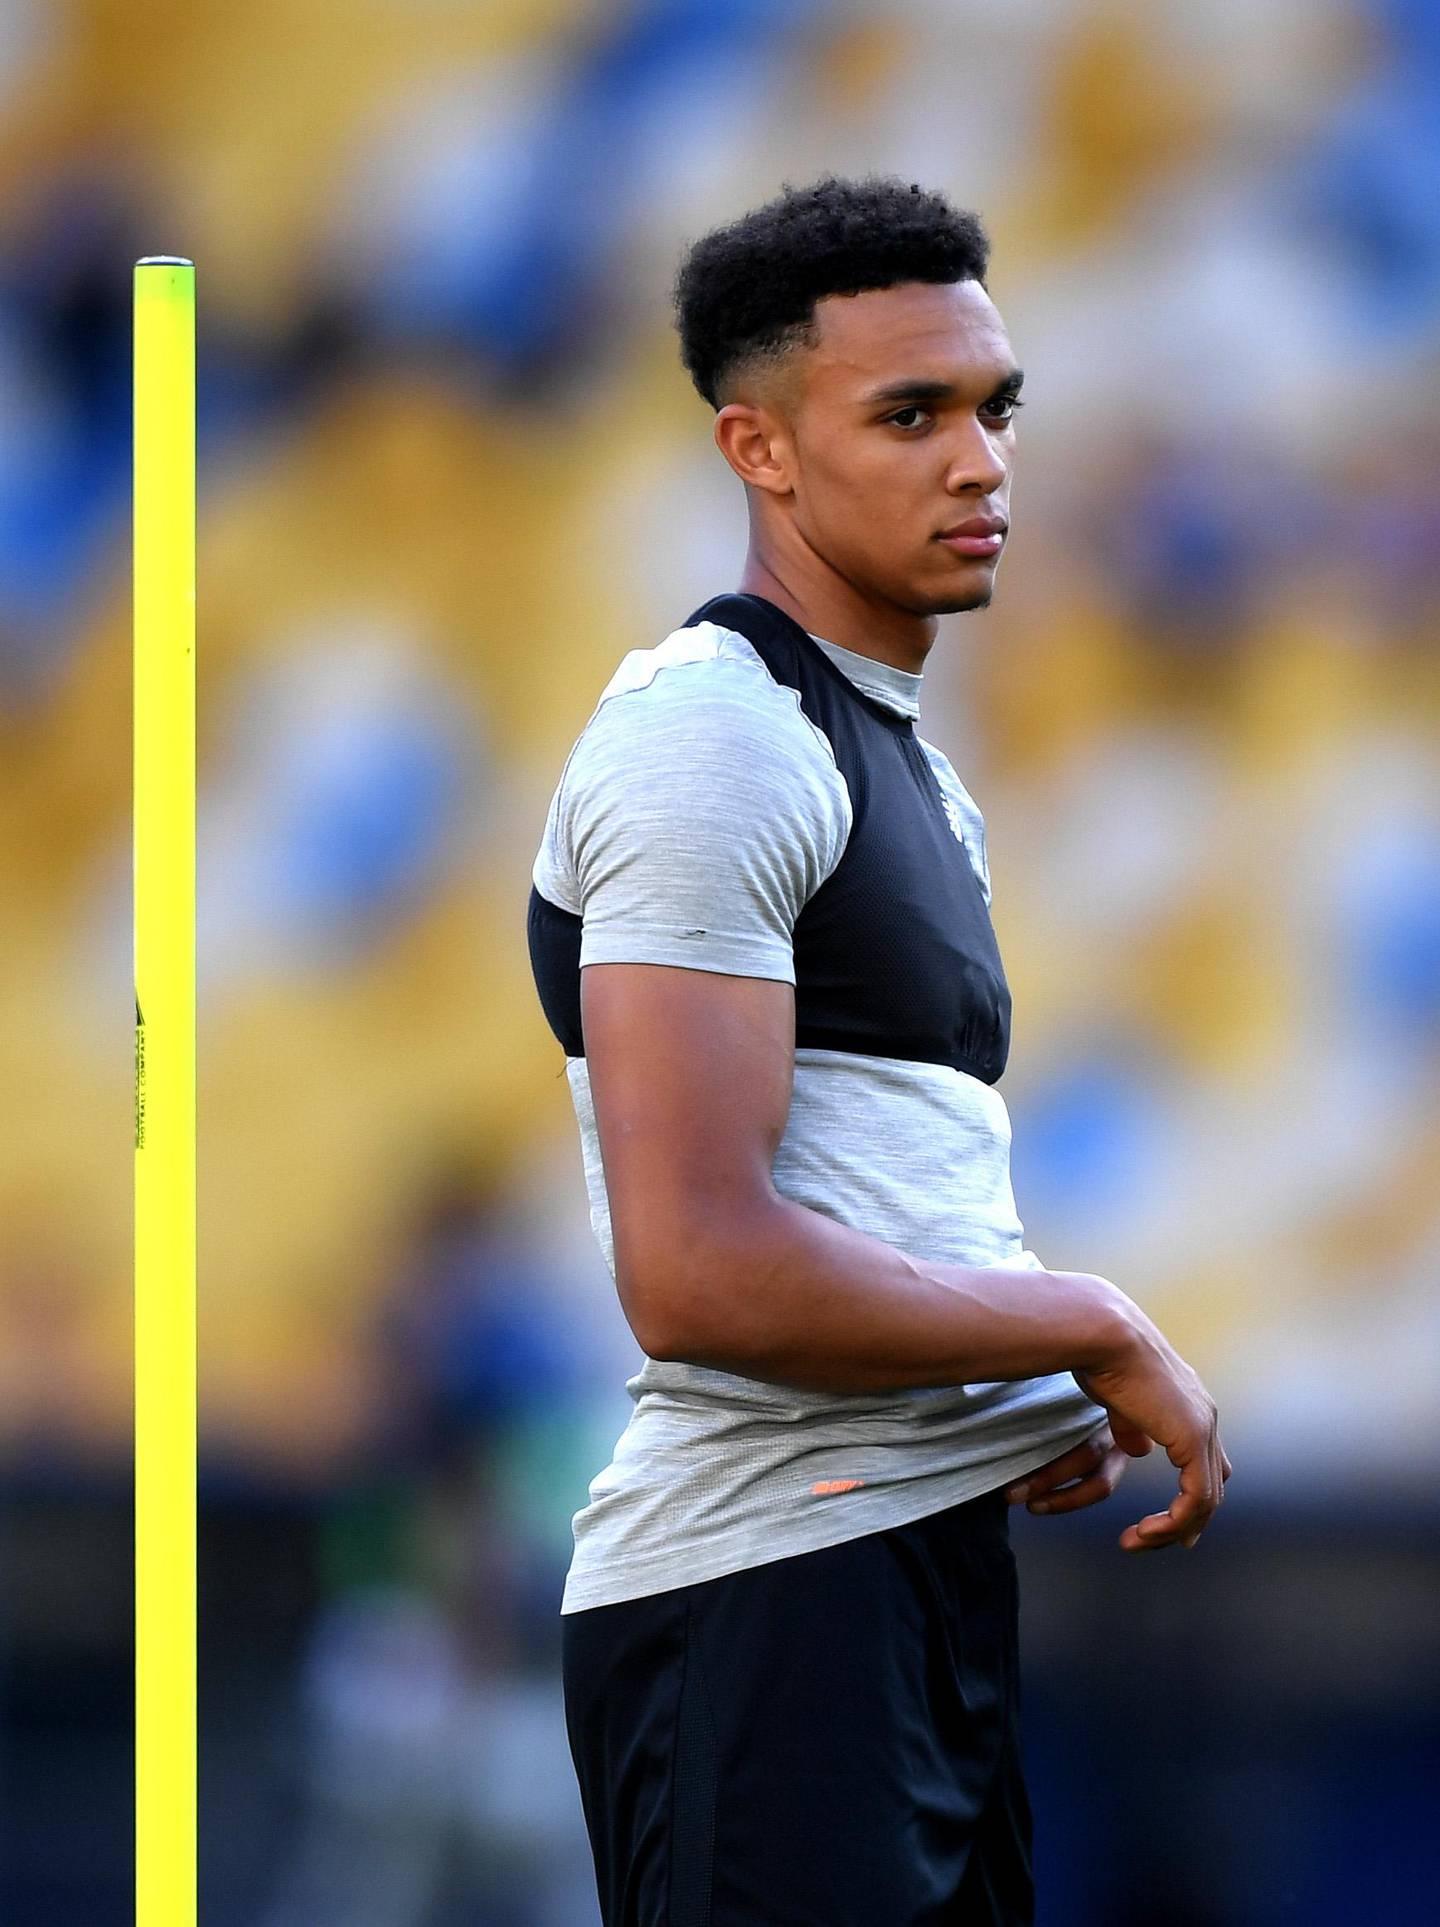 KIEV, UKRAINE - MAY 25:  Trent Alexander-Arnold of Liverpool looks on during a Liverpool training session ahead of the UEFA Champions League Final against Real Madrid at NSC Olimpiyskiy Stadium on May 25, 2018 in Kiev, Ukraine.  (Photo by Shaun Botterill/Getty Images)